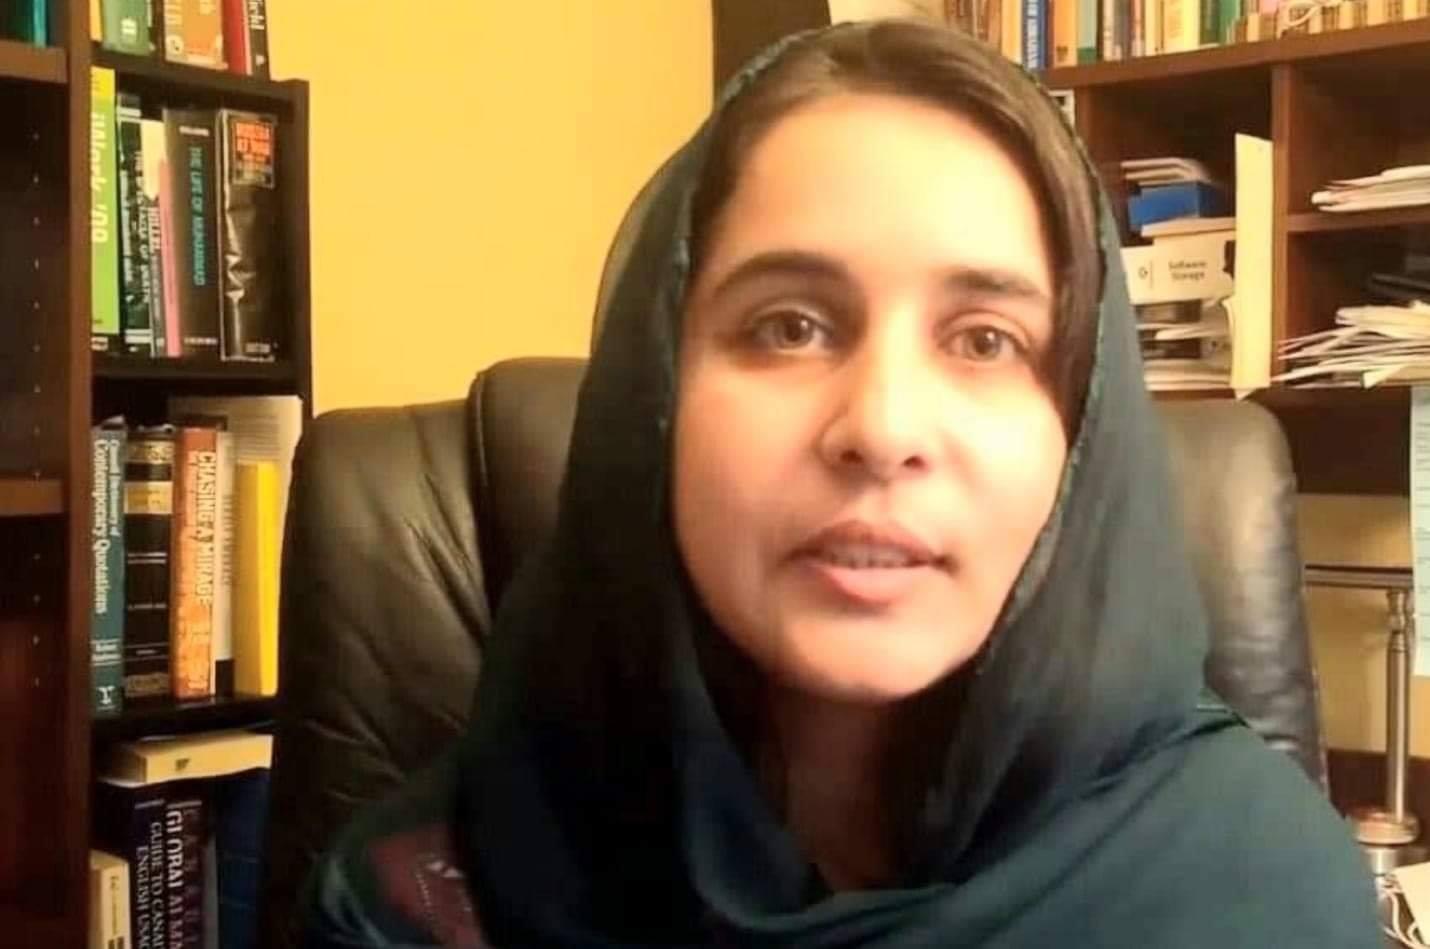 Pakistani rights activist Karima Baloch had been living in exile in Toronto, Canada. Photo: Facebook